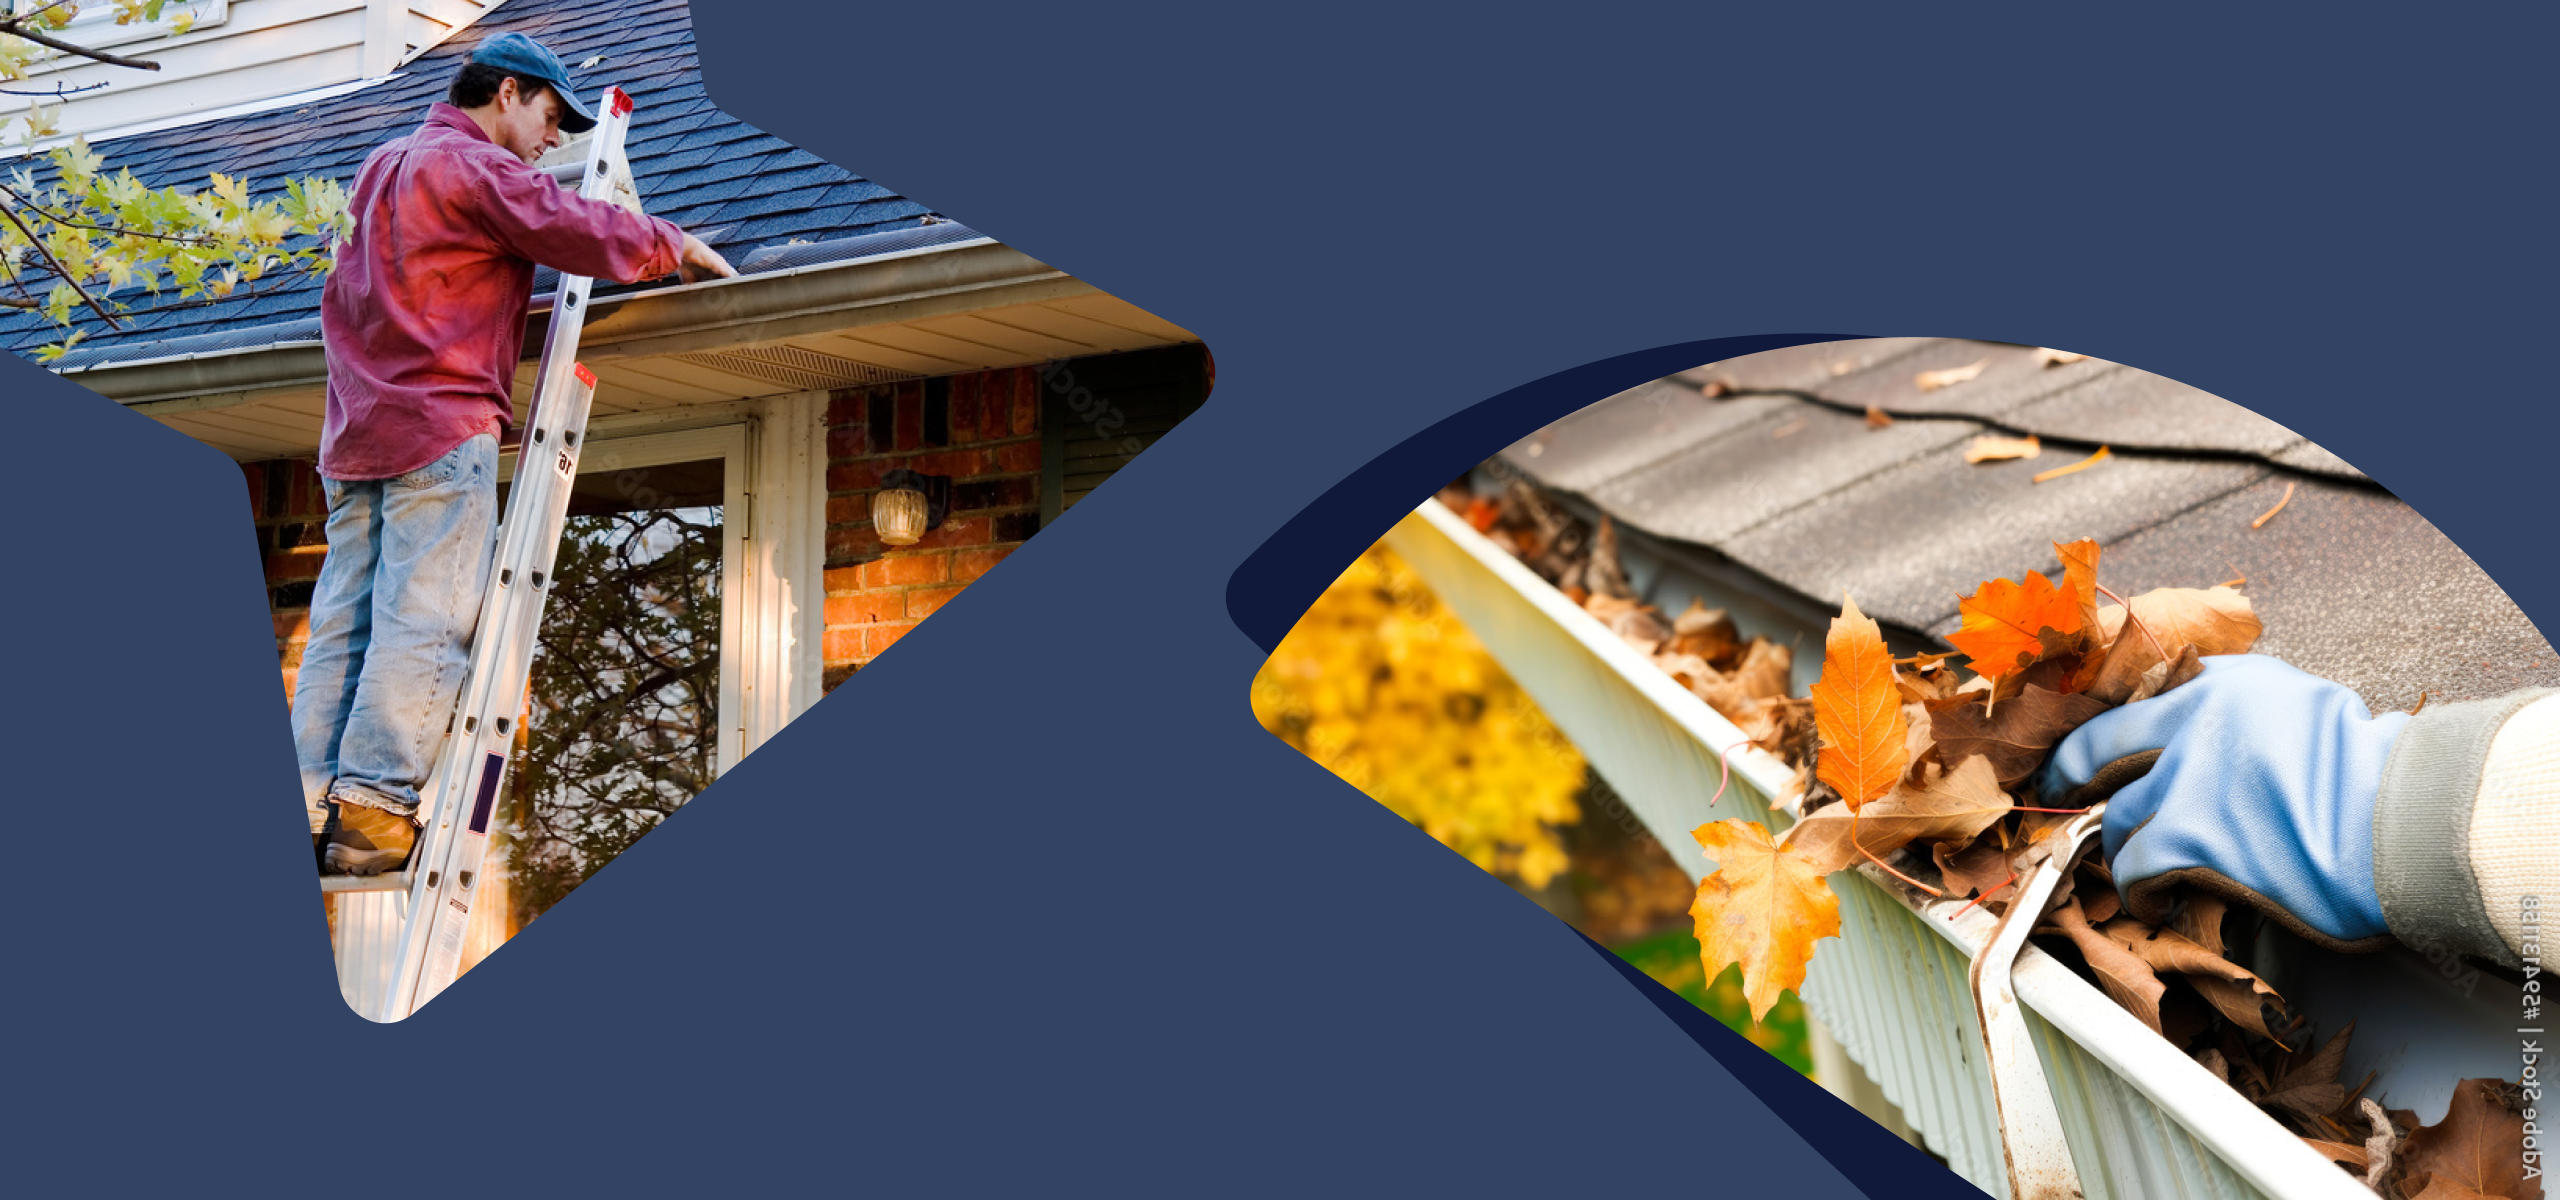 Hiring a Gutter Cleaner for Your Rental